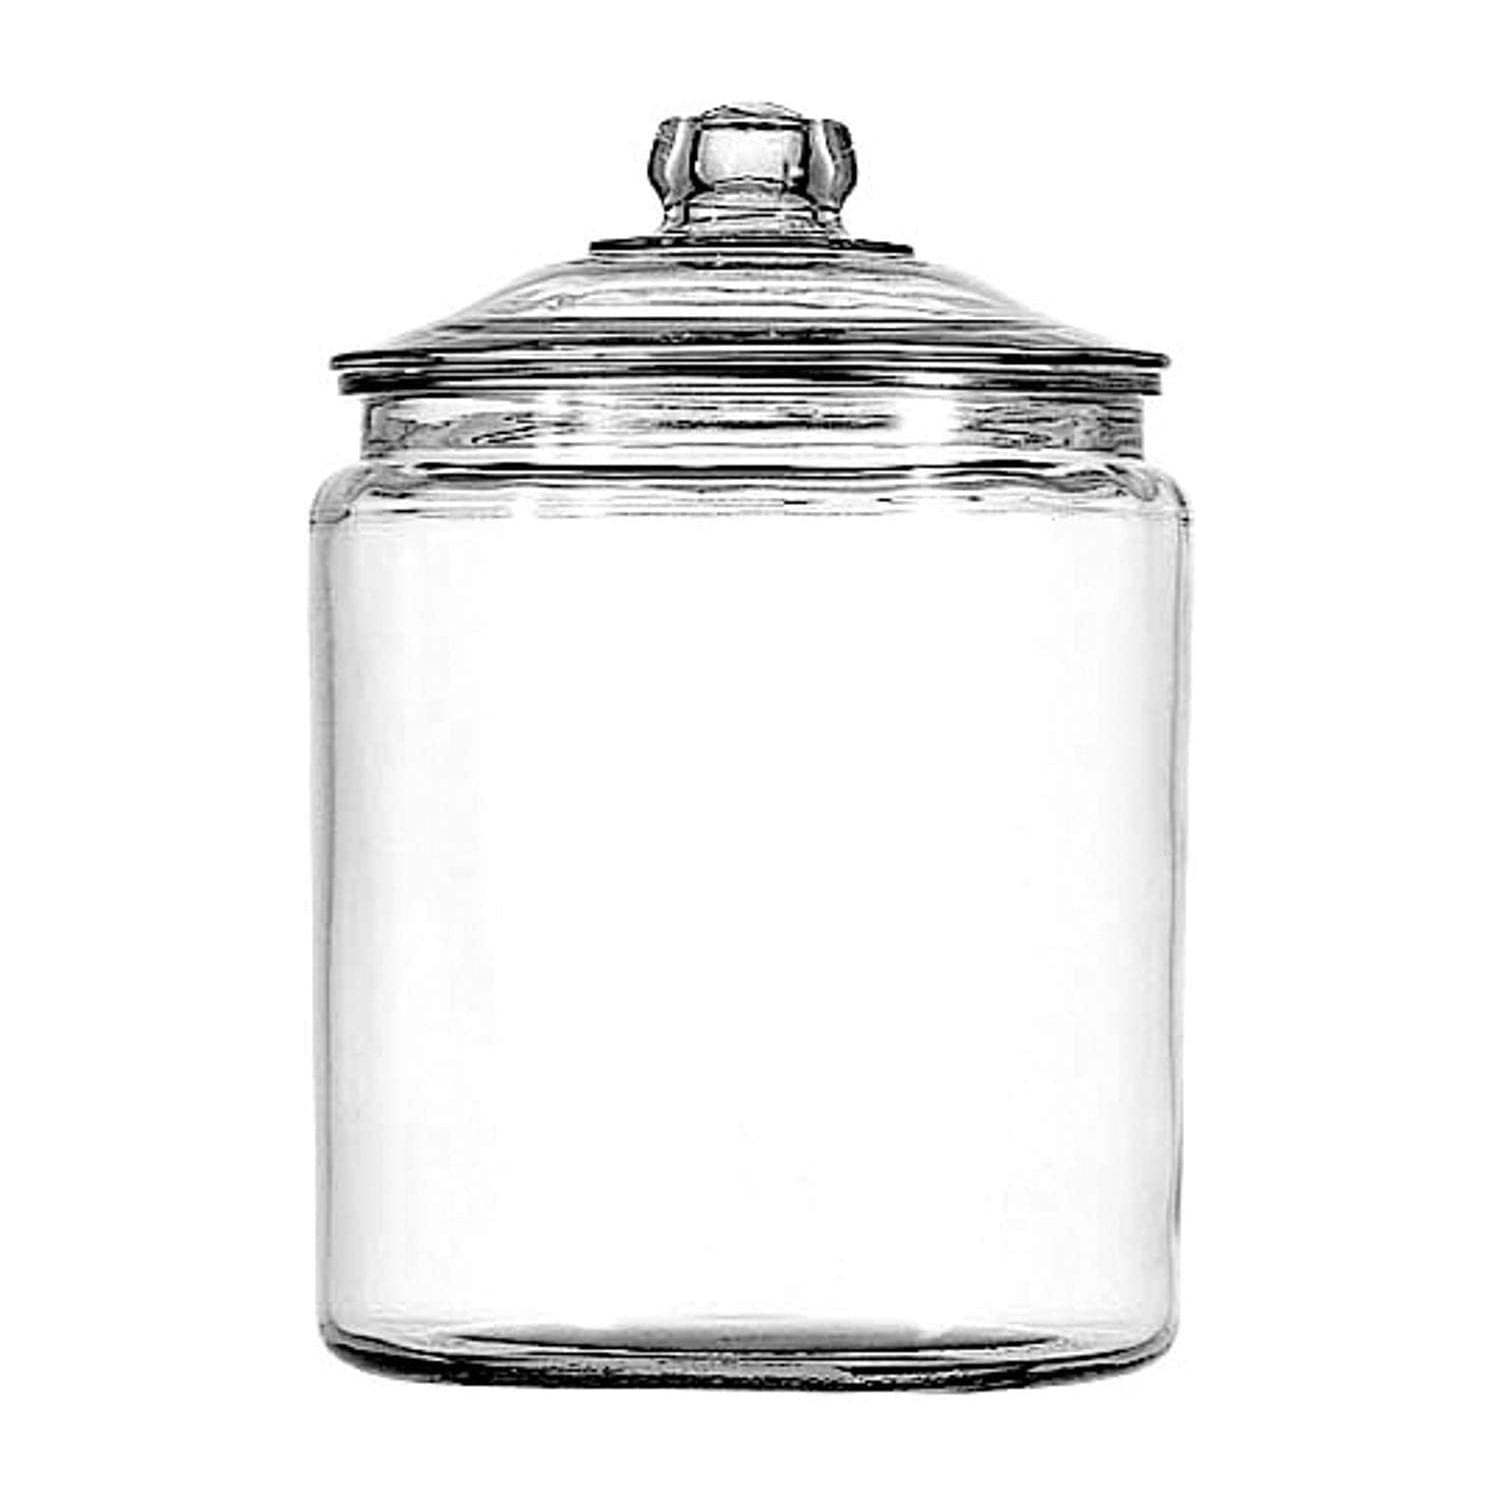 Anchor Hocking Heritage Hill Clear Glass Jar with Lid, 2 Gallon